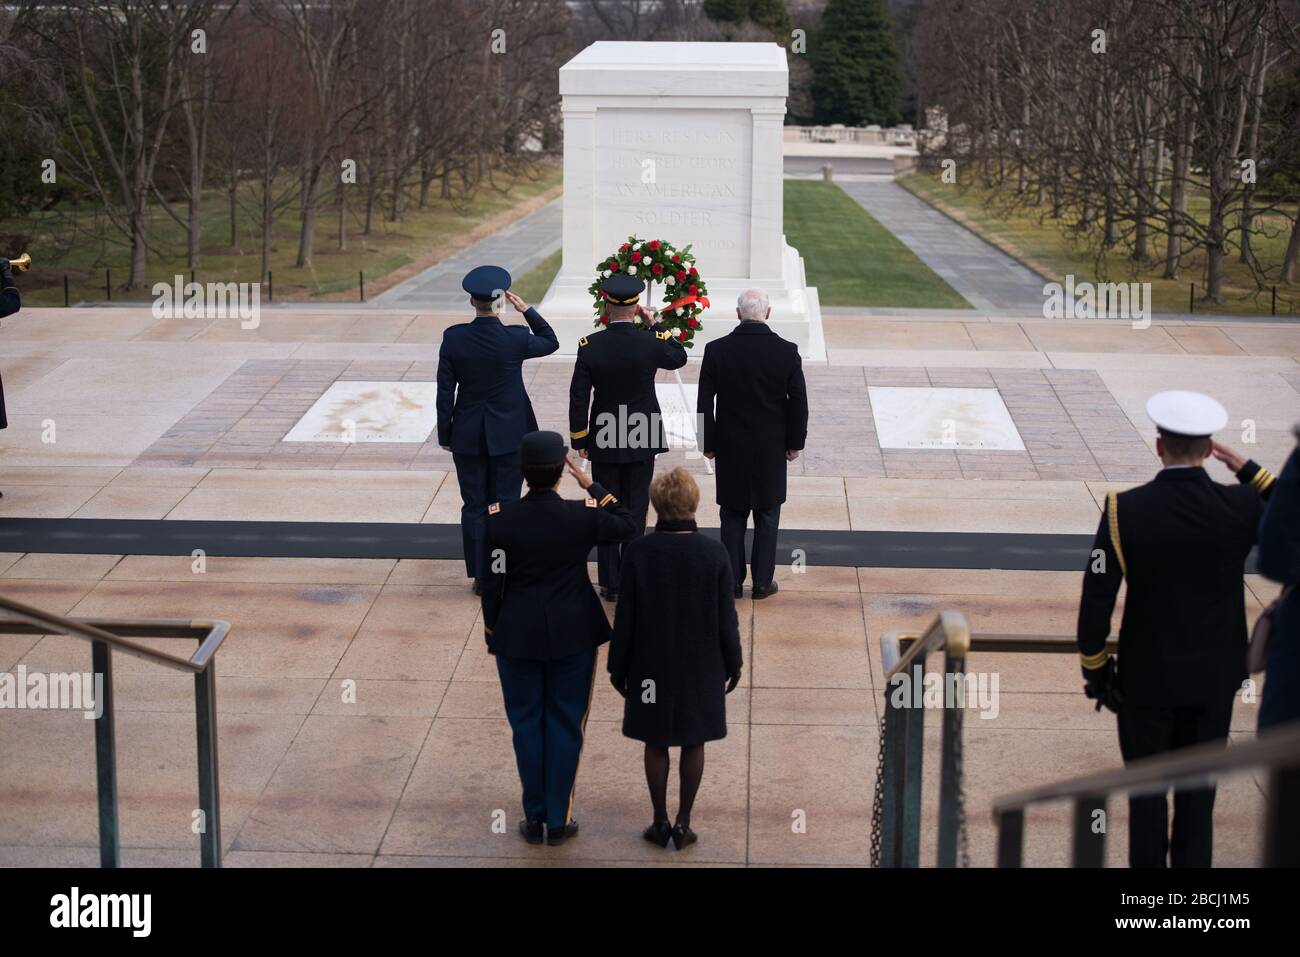 'From the top left, U.S. Air Force Gen. Paul J. Selva, vice chairman of the Joint Chiefs of Staff and Maj. Gen. Bradley A. Becker, commanding general Joint Force Headquarters-National Capital Region and U.S. Army Military District of Washington, escort Governor General of Canada David Johnston to lay a wreath at the Tomb of the Unknown Soldier at Arlington National Cemetery, Feb. 10, 2016, in Arlington, Va. Following the ceremony at the Tomb, Johnston also laid a wreath at the Canadian Cross of Sacrifice. . (U.S. Army photo by Rachel Larue/Arlington National Cemetery/released); 10 February 201 Stock Photo